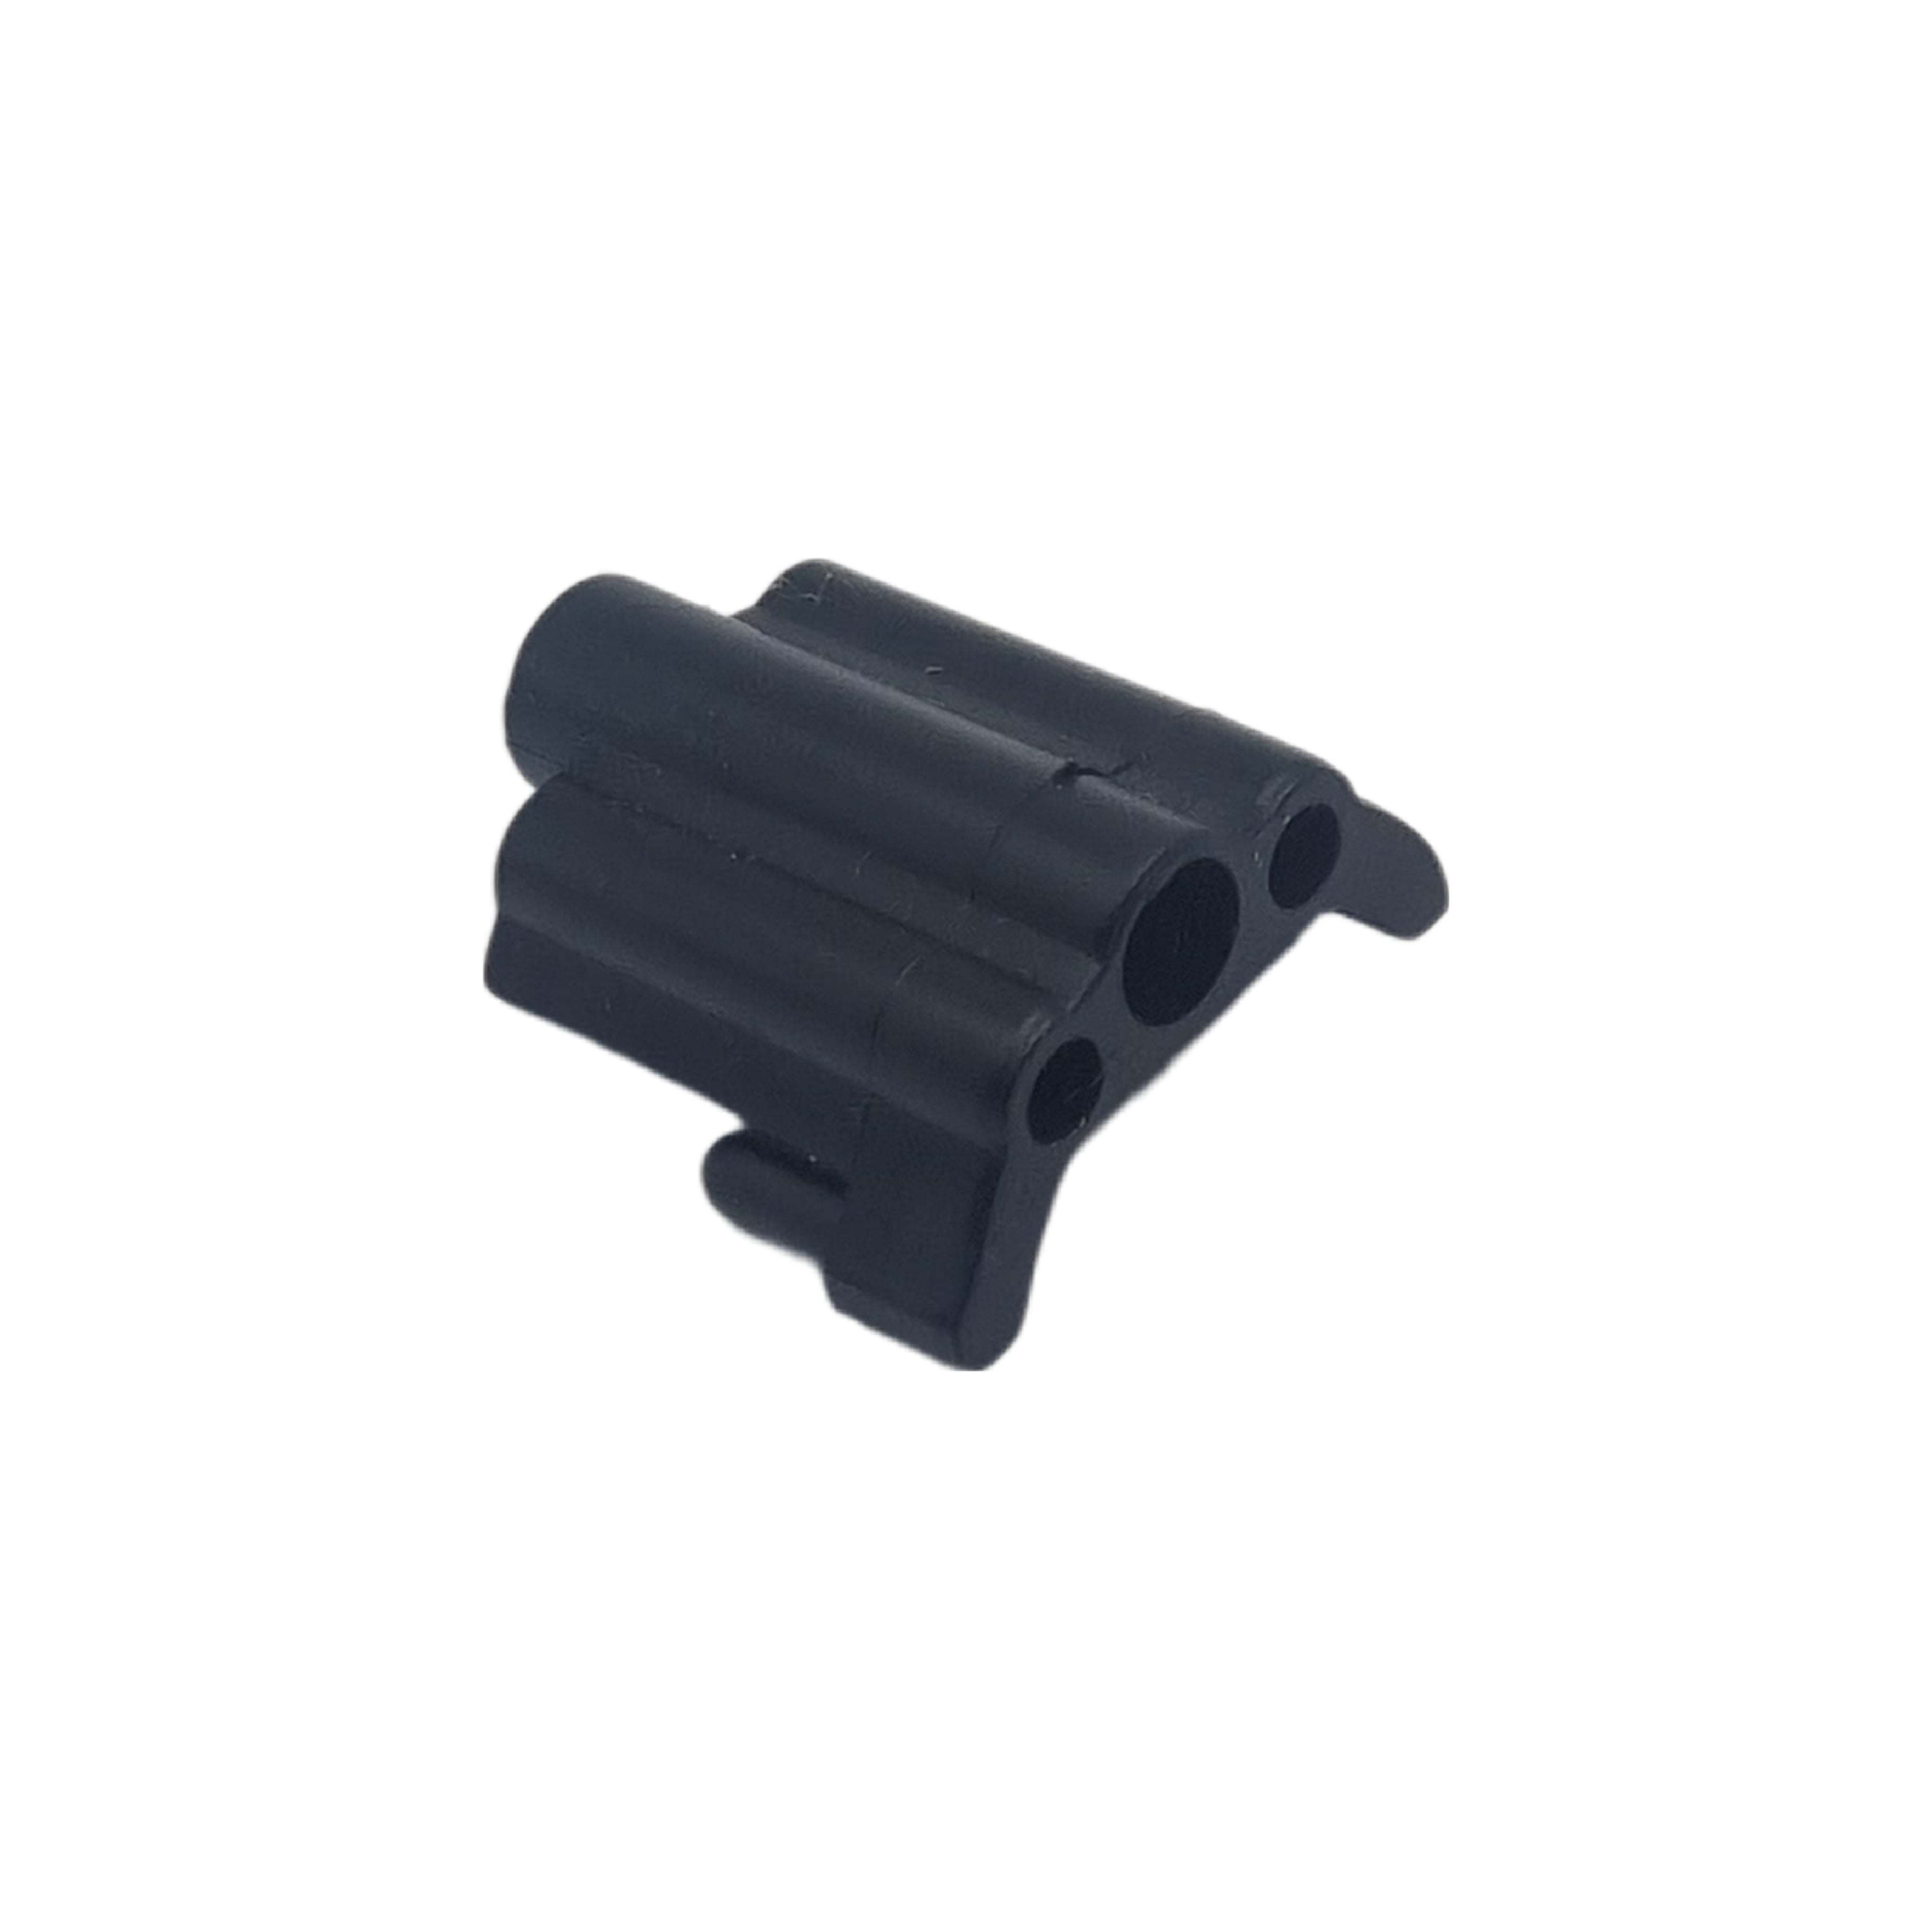 Action Army AAP01 Replacement Part 69 - Nozzle Block